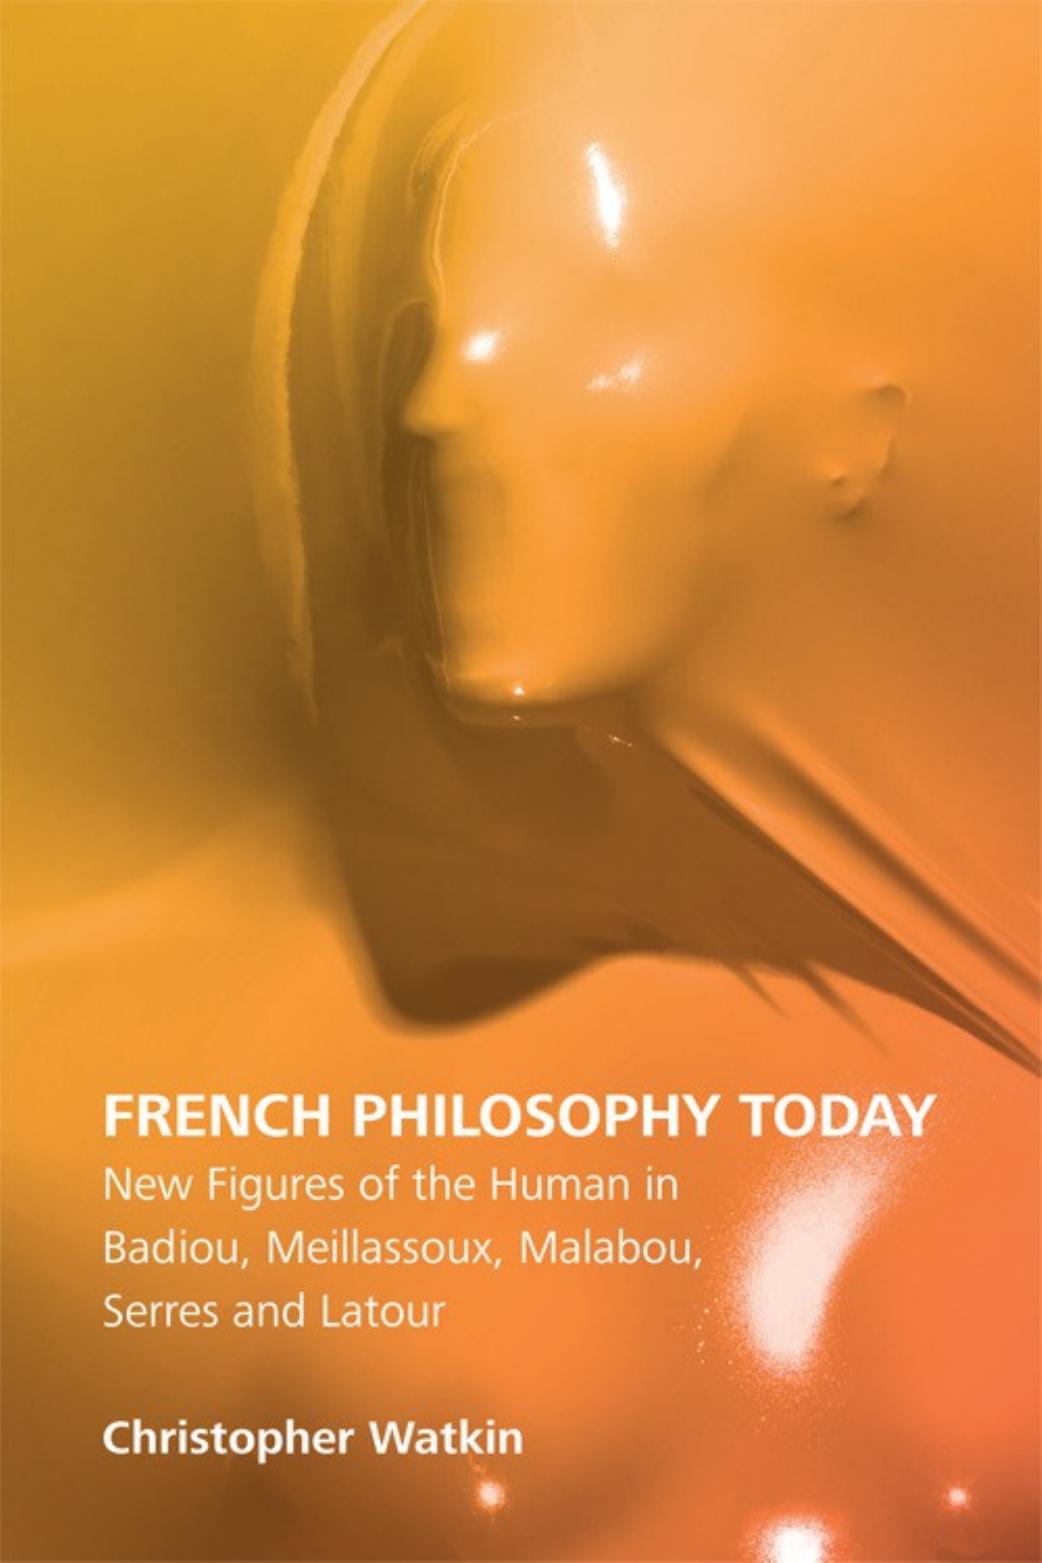 French Philosophy Today: New Figures of the Human in Badiou, Meillassoux, Malabou, Serres and Latour